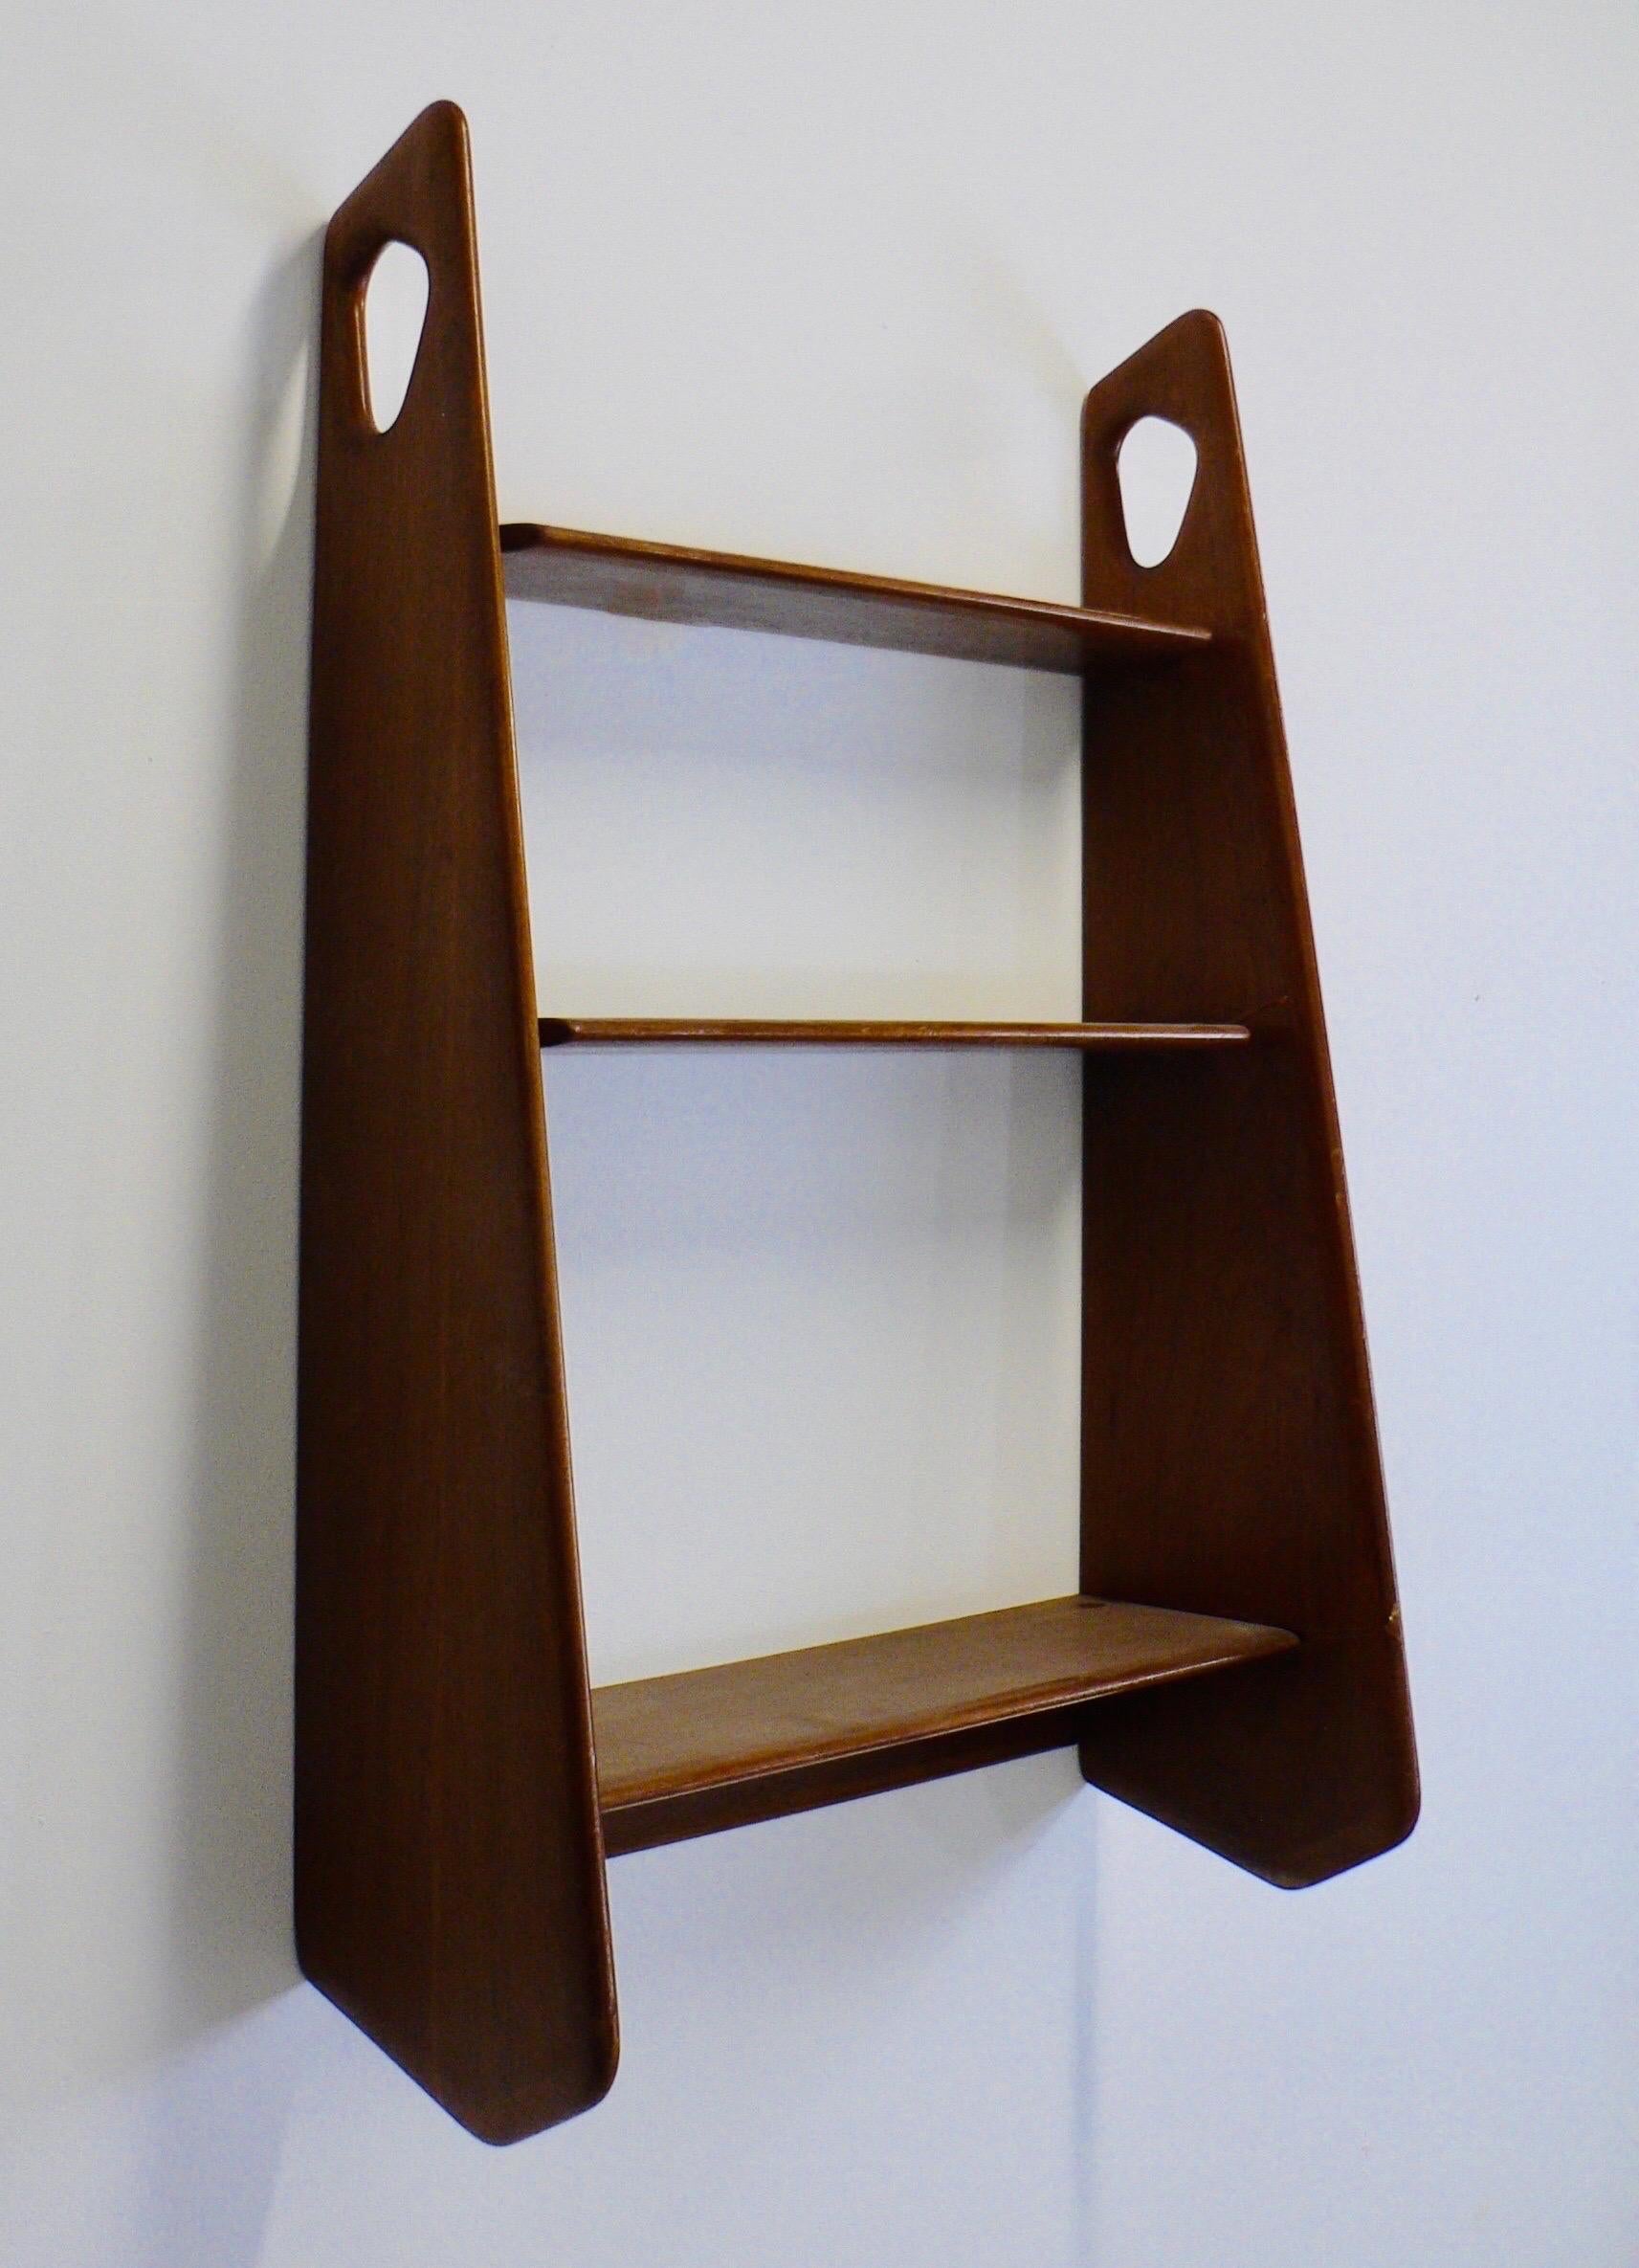 Rare suspended Teak Bookshelf from the 1950s, by Pierre Cruege for Éditions Formes.

In Perfect Condition, Typical French Design of the Era